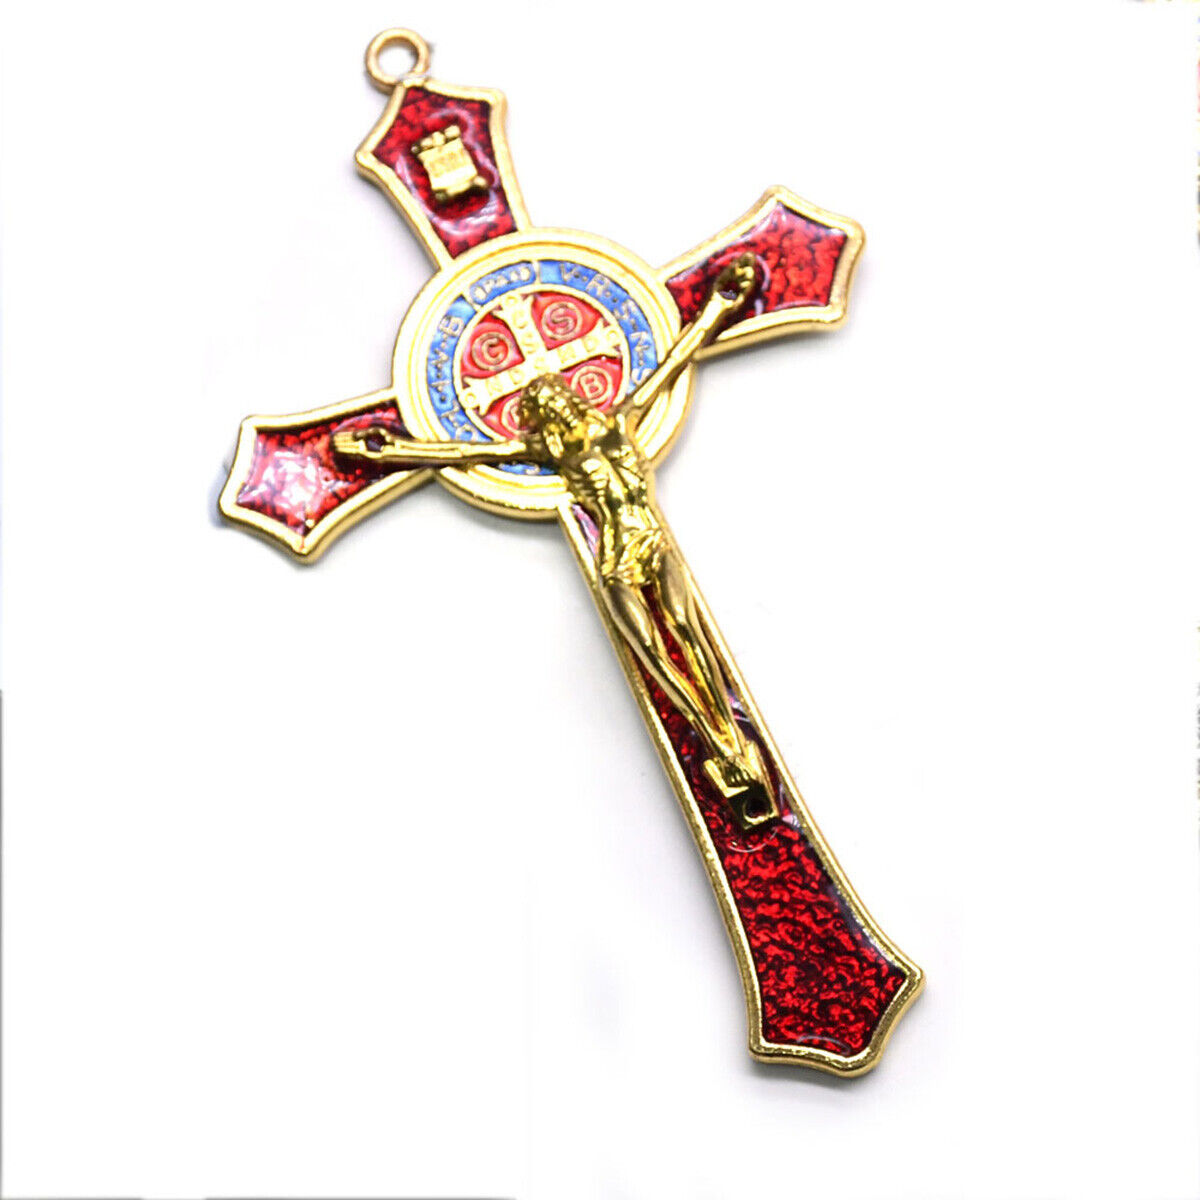 Vintage Metal Hand Hold Cross Crucifix Jesus Holy Religious Carved Christ Red